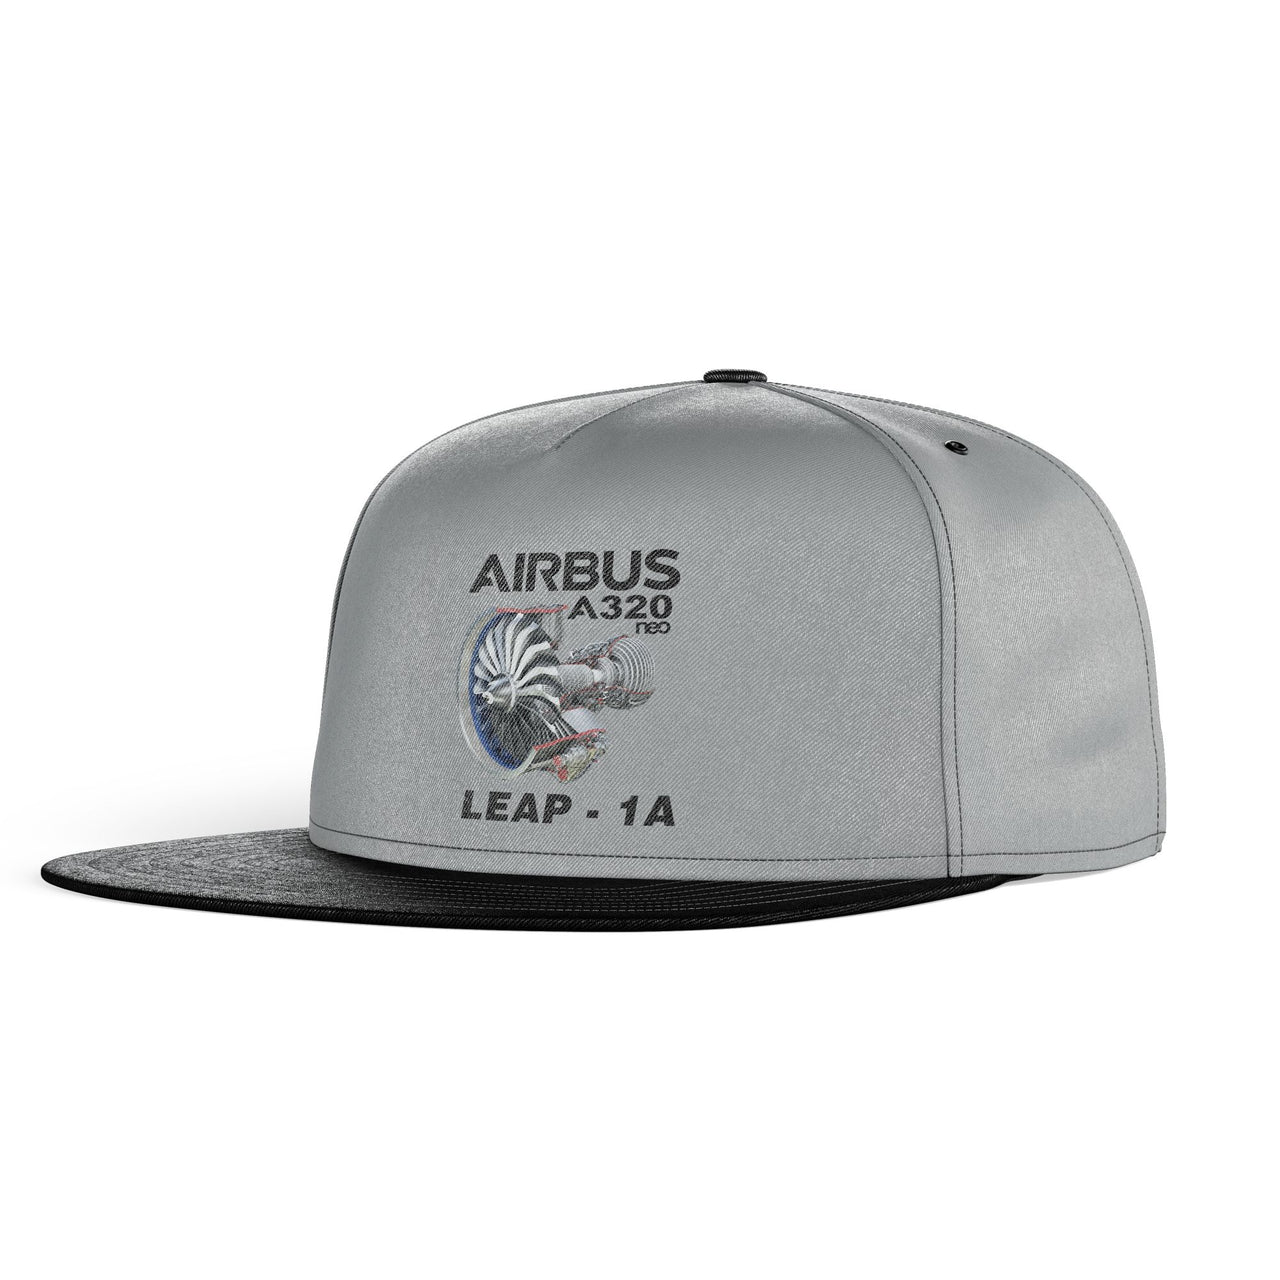 Airbus A320neo & Leap 1A Designed Snapback Caps & Hats